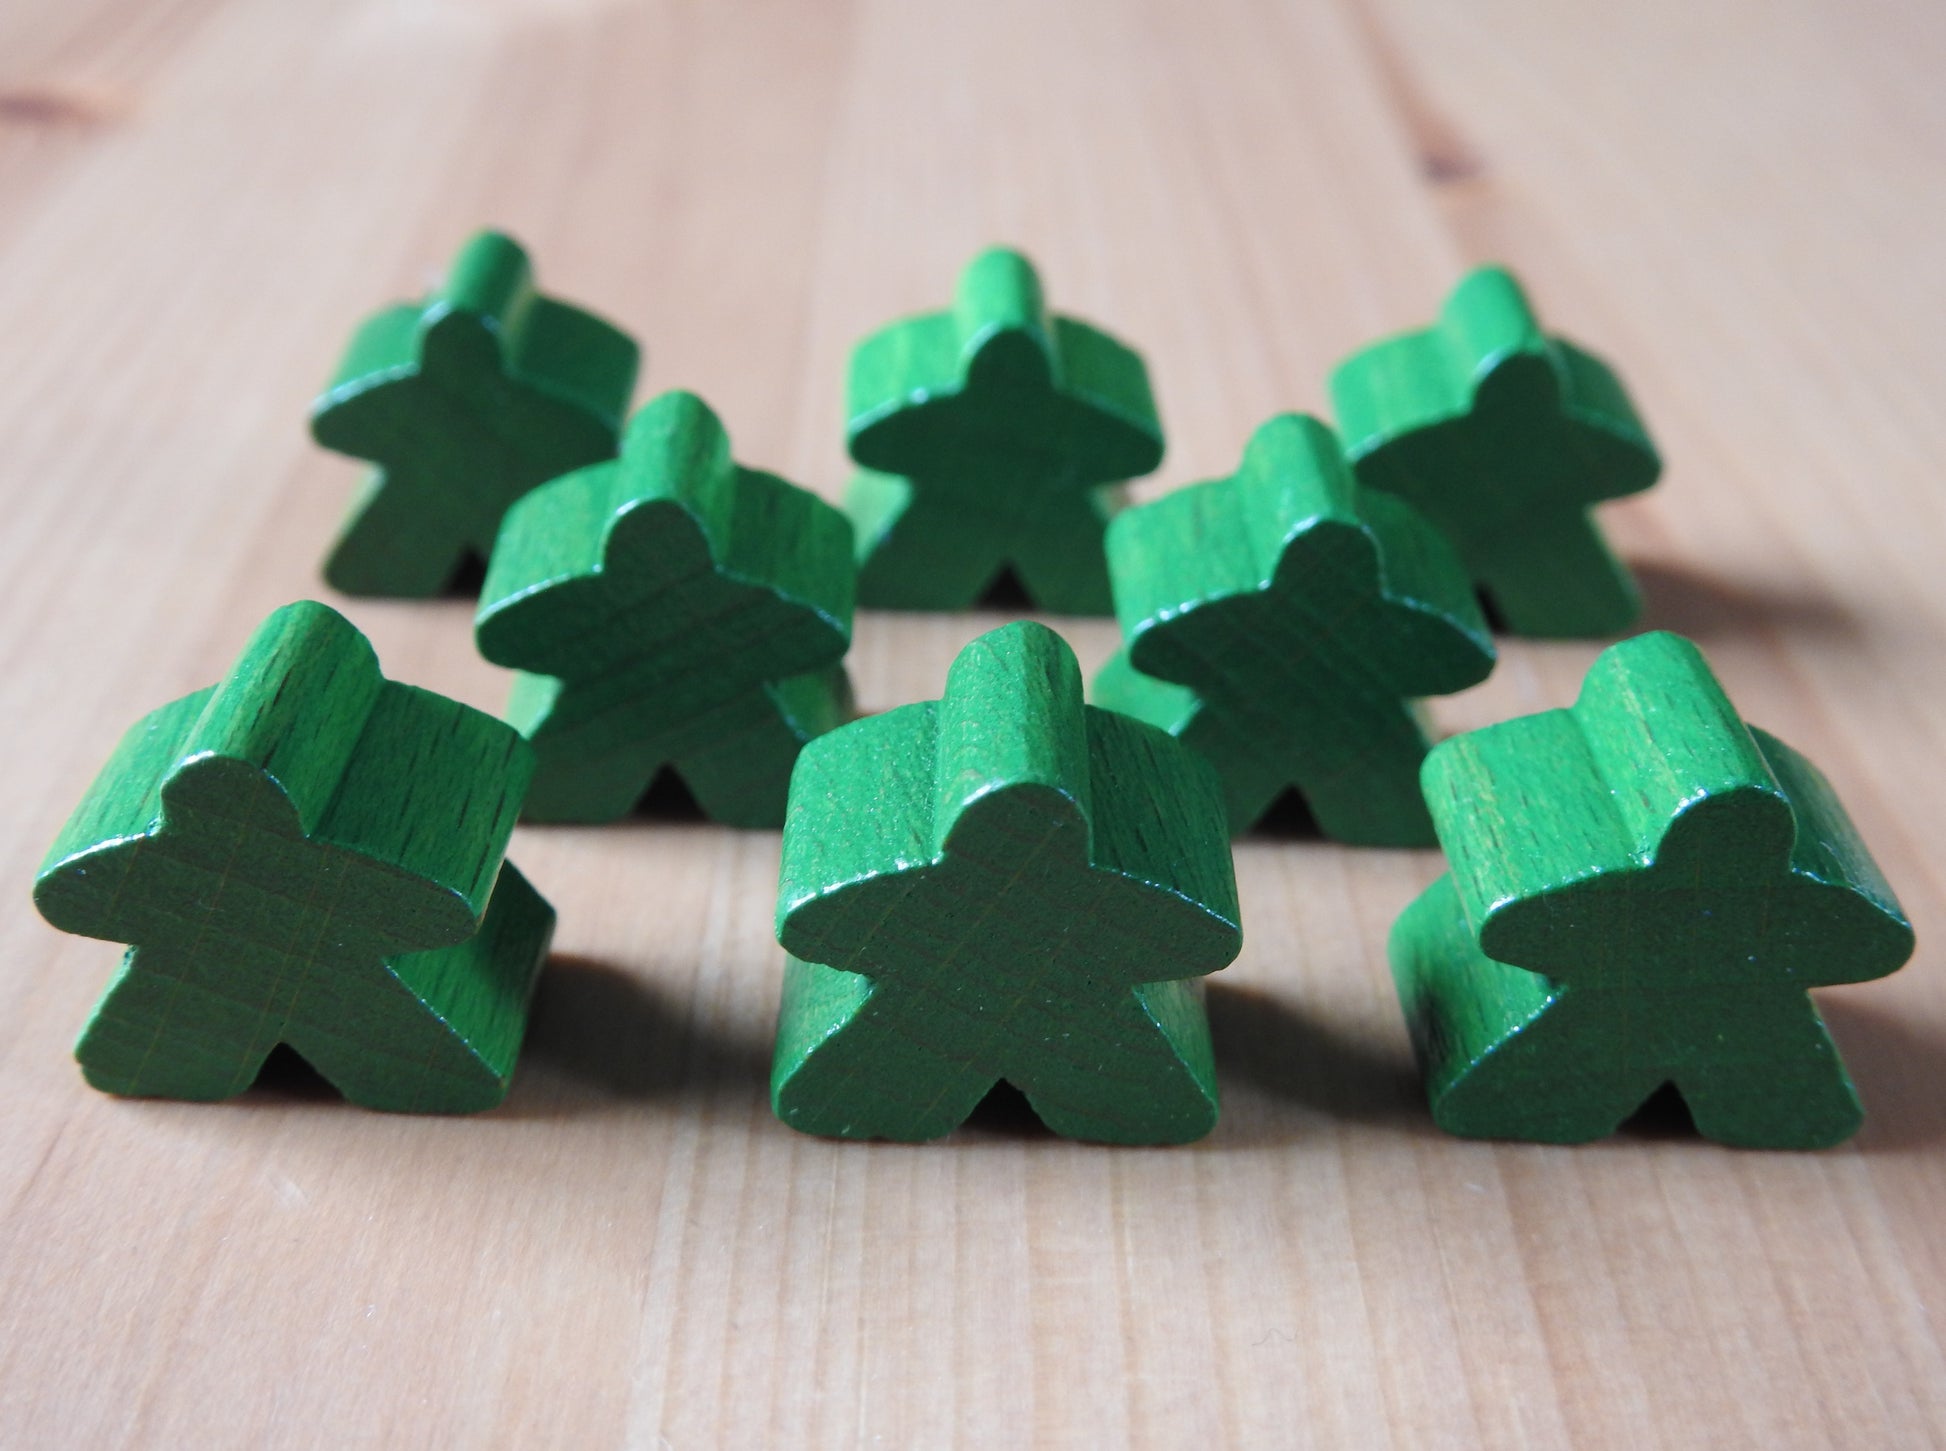 Close-up view of the dark green set of 8 meeples.